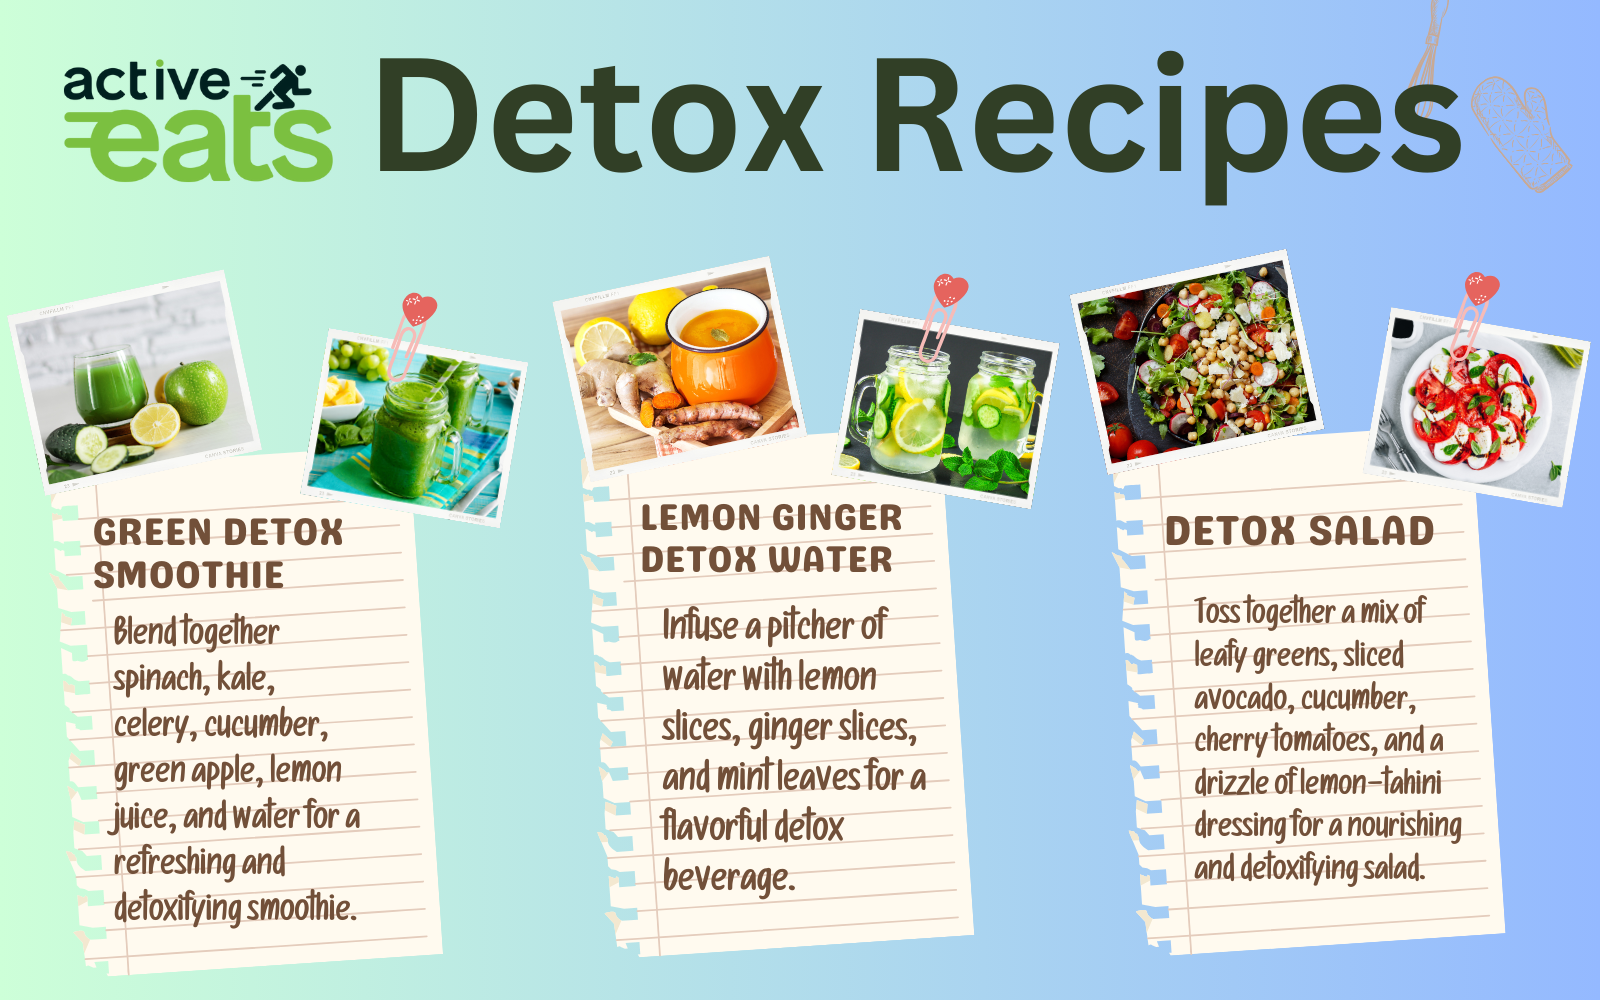 image: A visual representation of the top 3 detox recipes. The image showcases text and appealing food icons for a green smoothie, a quinoa and vegetable salad, and a berry-infused water. These recipes are geared toward detoxification and improving overall health. This image serves as a quick reference for delicious and nutritious detox meal ideas.